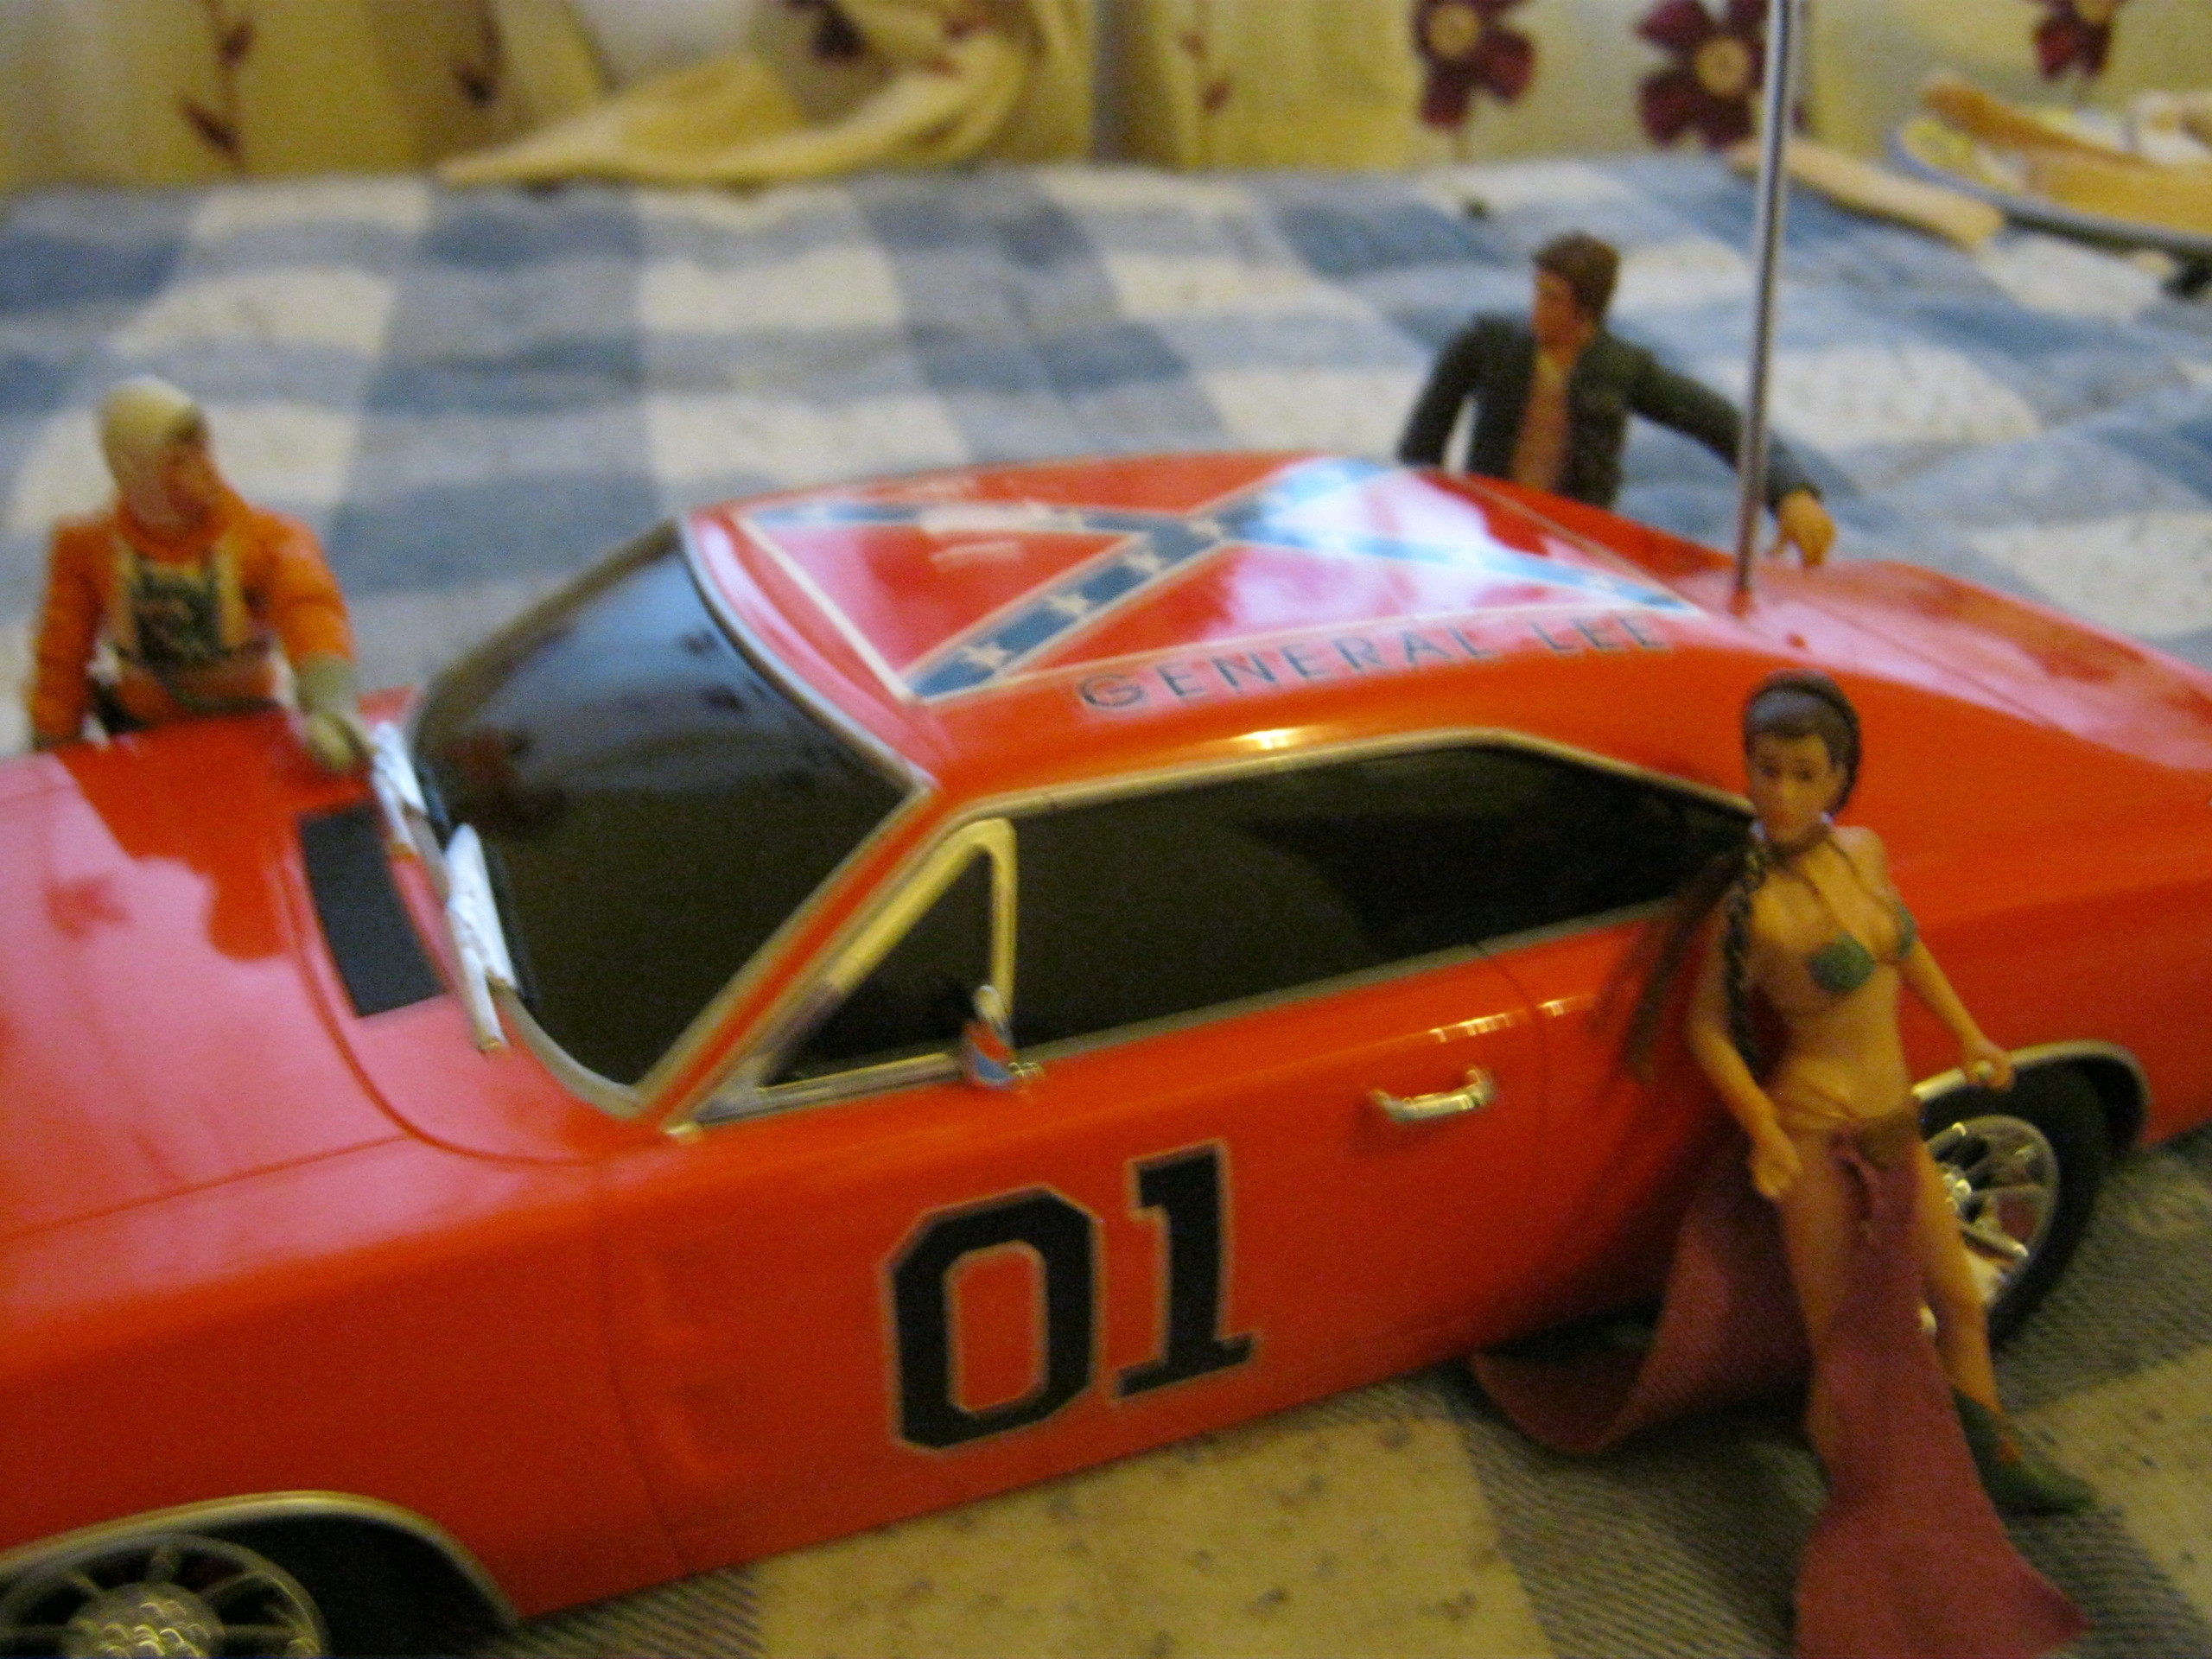 2560x1920 Dukes Of Hazzard picture: dukes and lee the dukes of haz ...